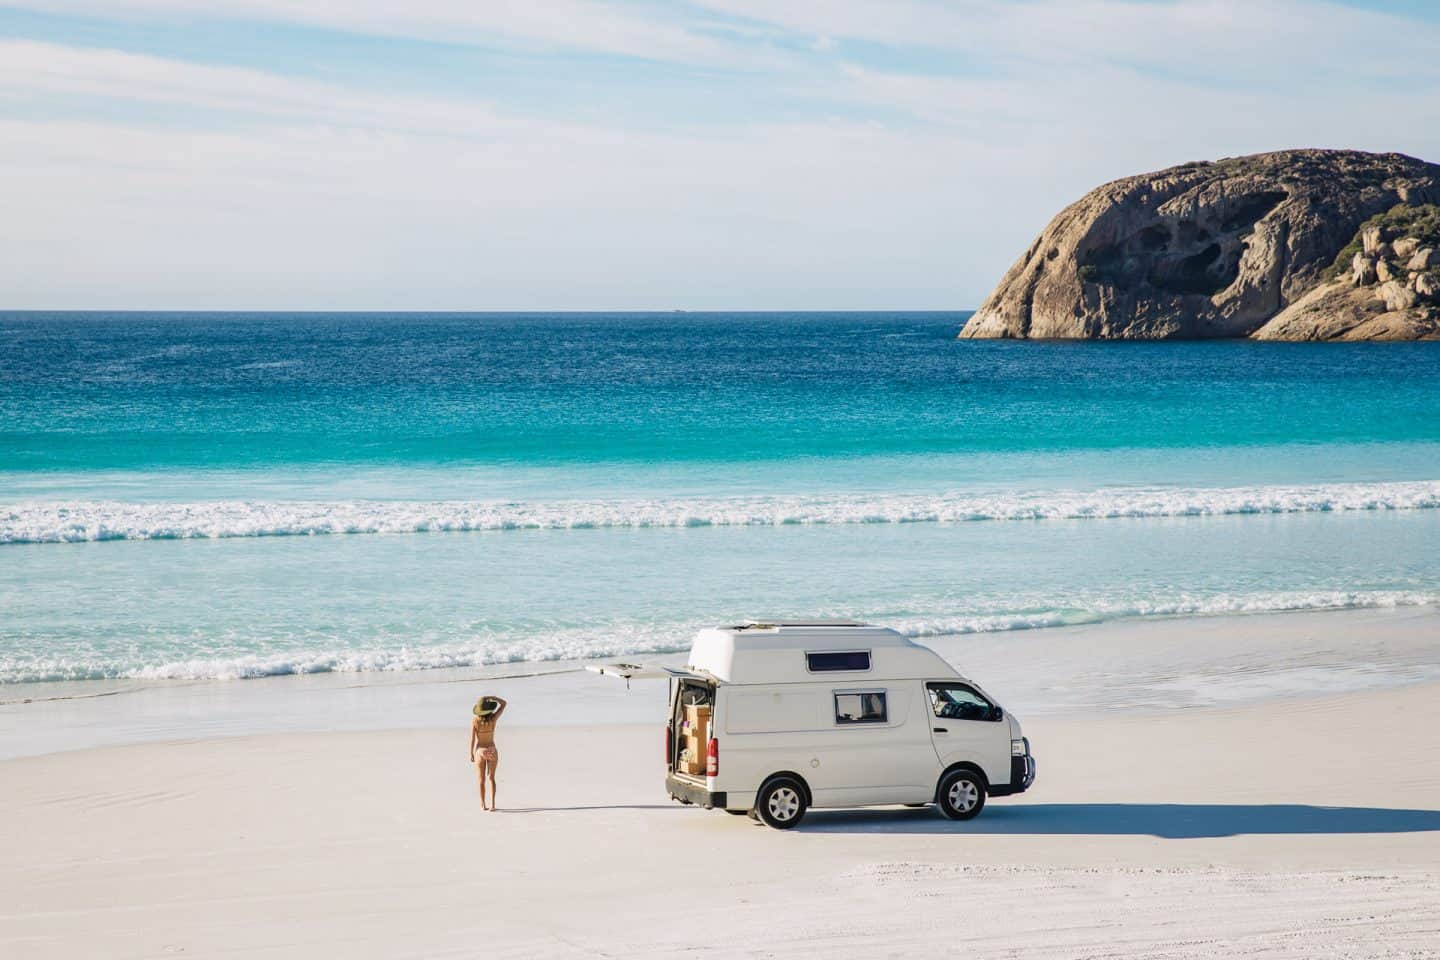 things to do in esperance, what to do in esperance, esperance things to do, esperance attractions, beaches in esperance